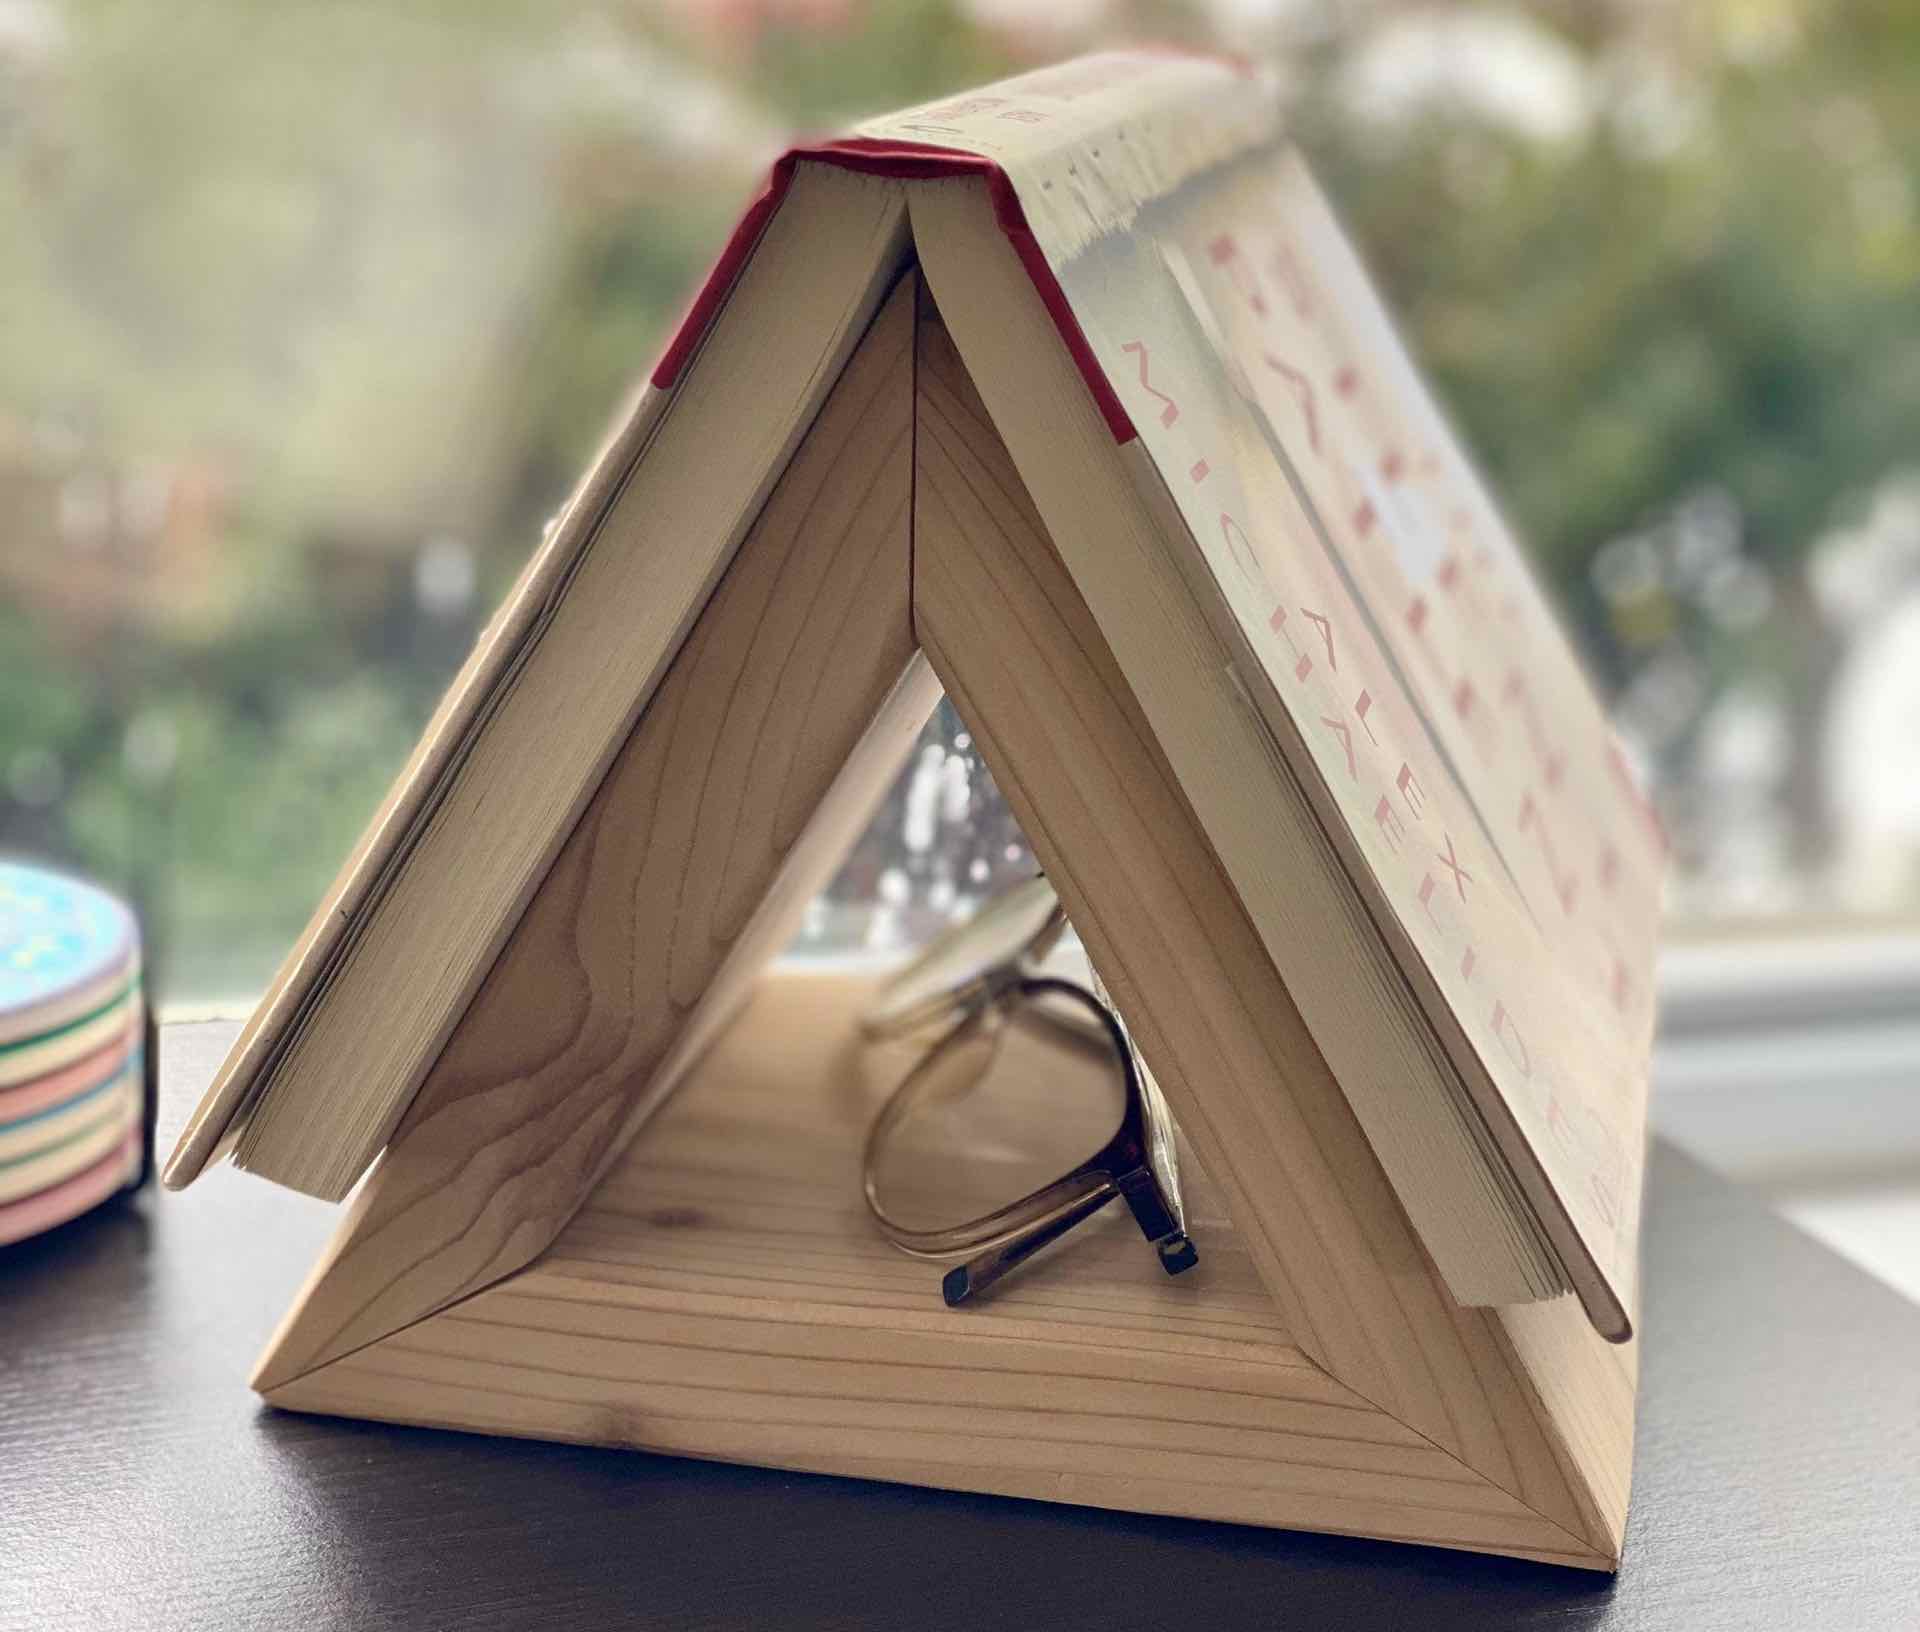 blank-canvas-by-potters-triangle-bookstand